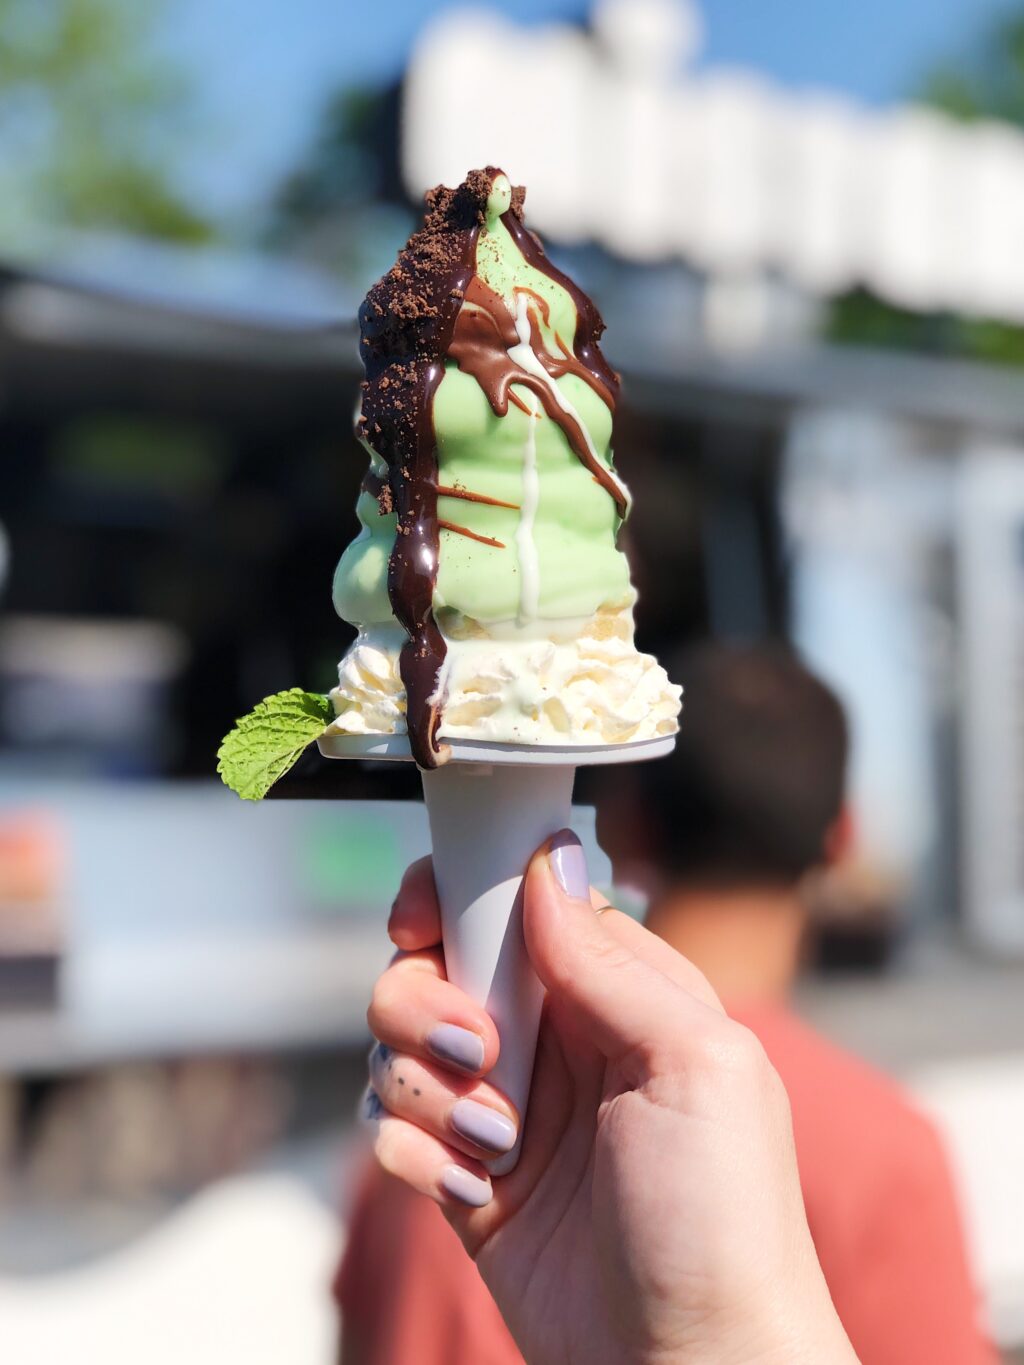 A paper cone of mint ice cream, drizzled with chocolate.